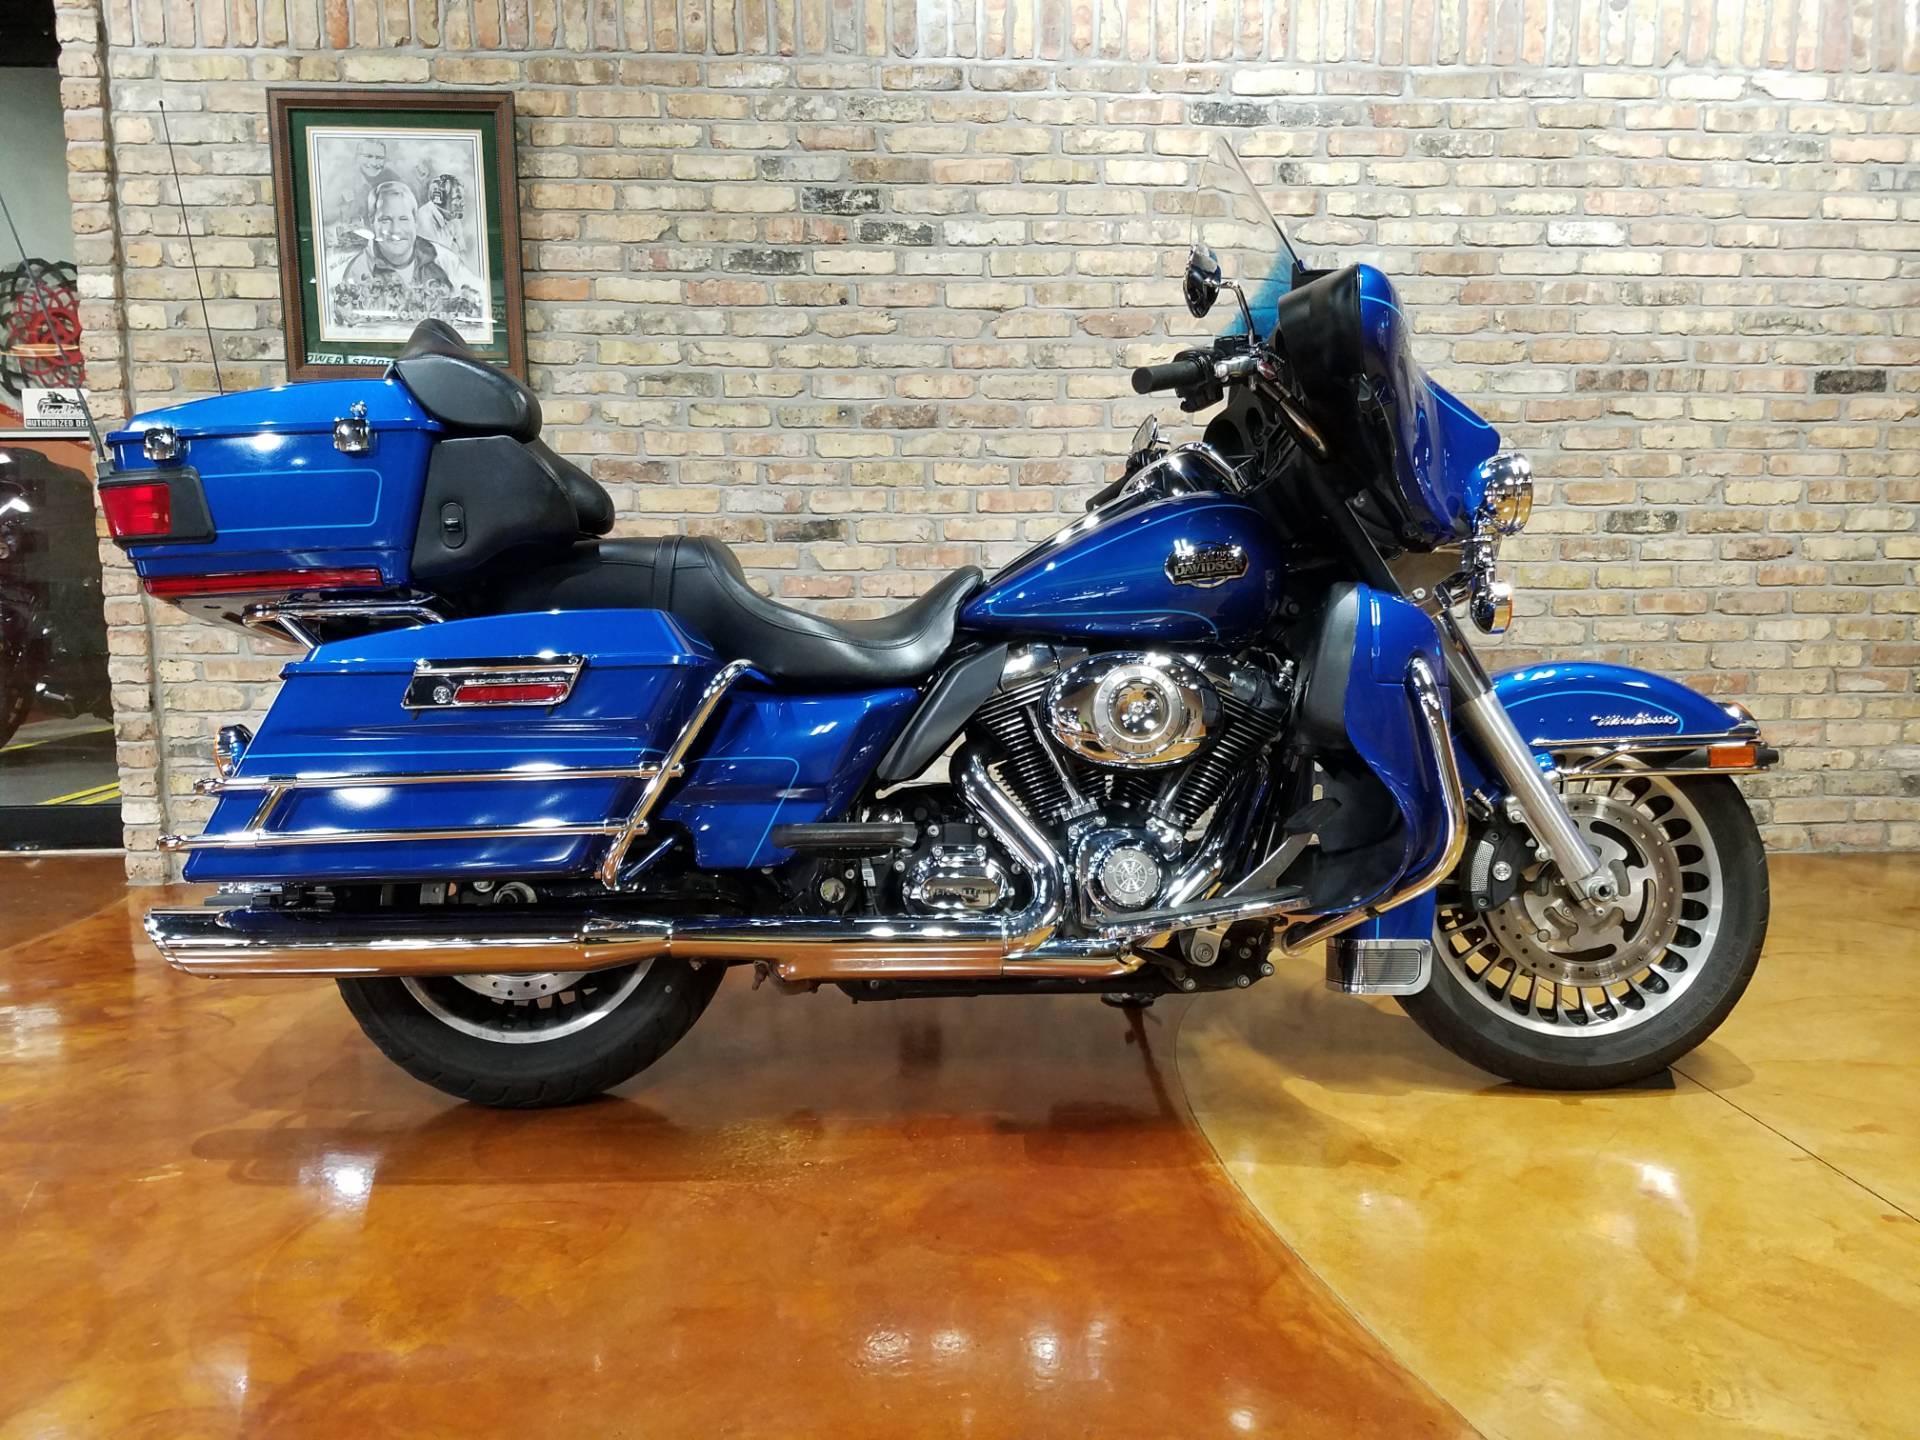 Used 2010 Harley Davidson Ultra Classic Electra Glide Motorcycles In Big Bend Wi 4314 Flame Blue Pearl